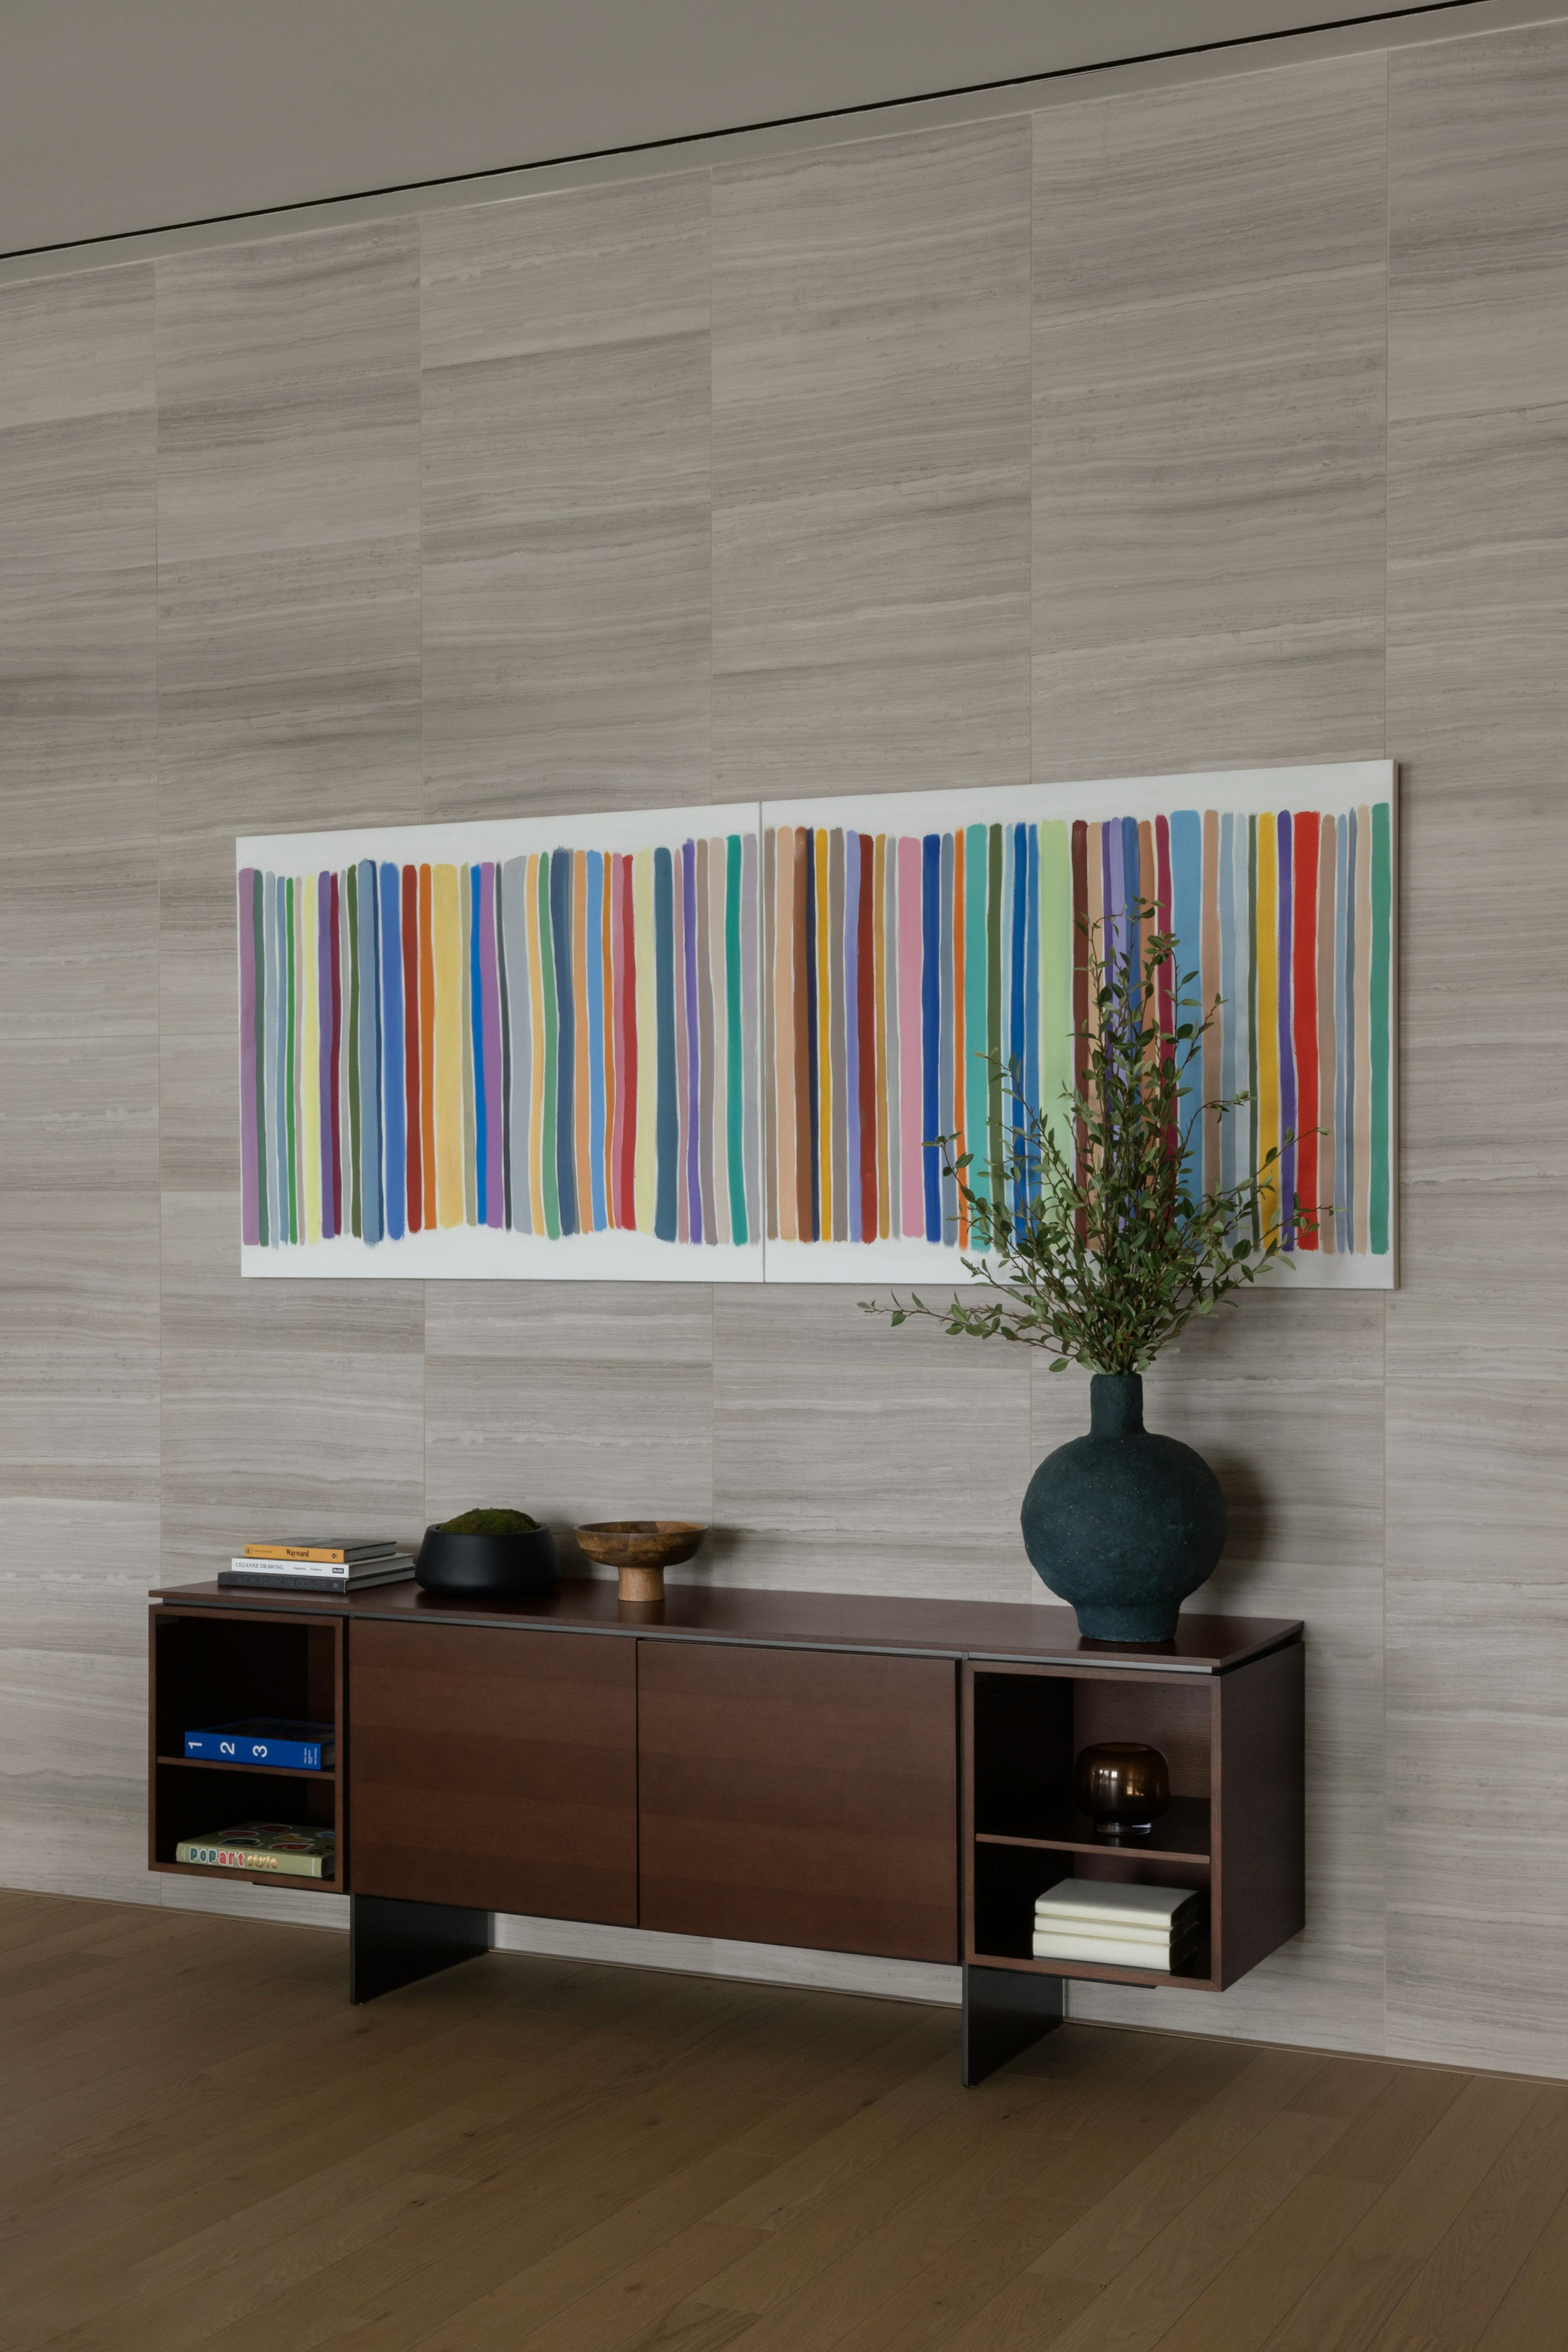 A diptych of repeating colorful lines by artist John Platt installed above a console table in Gotham Point.